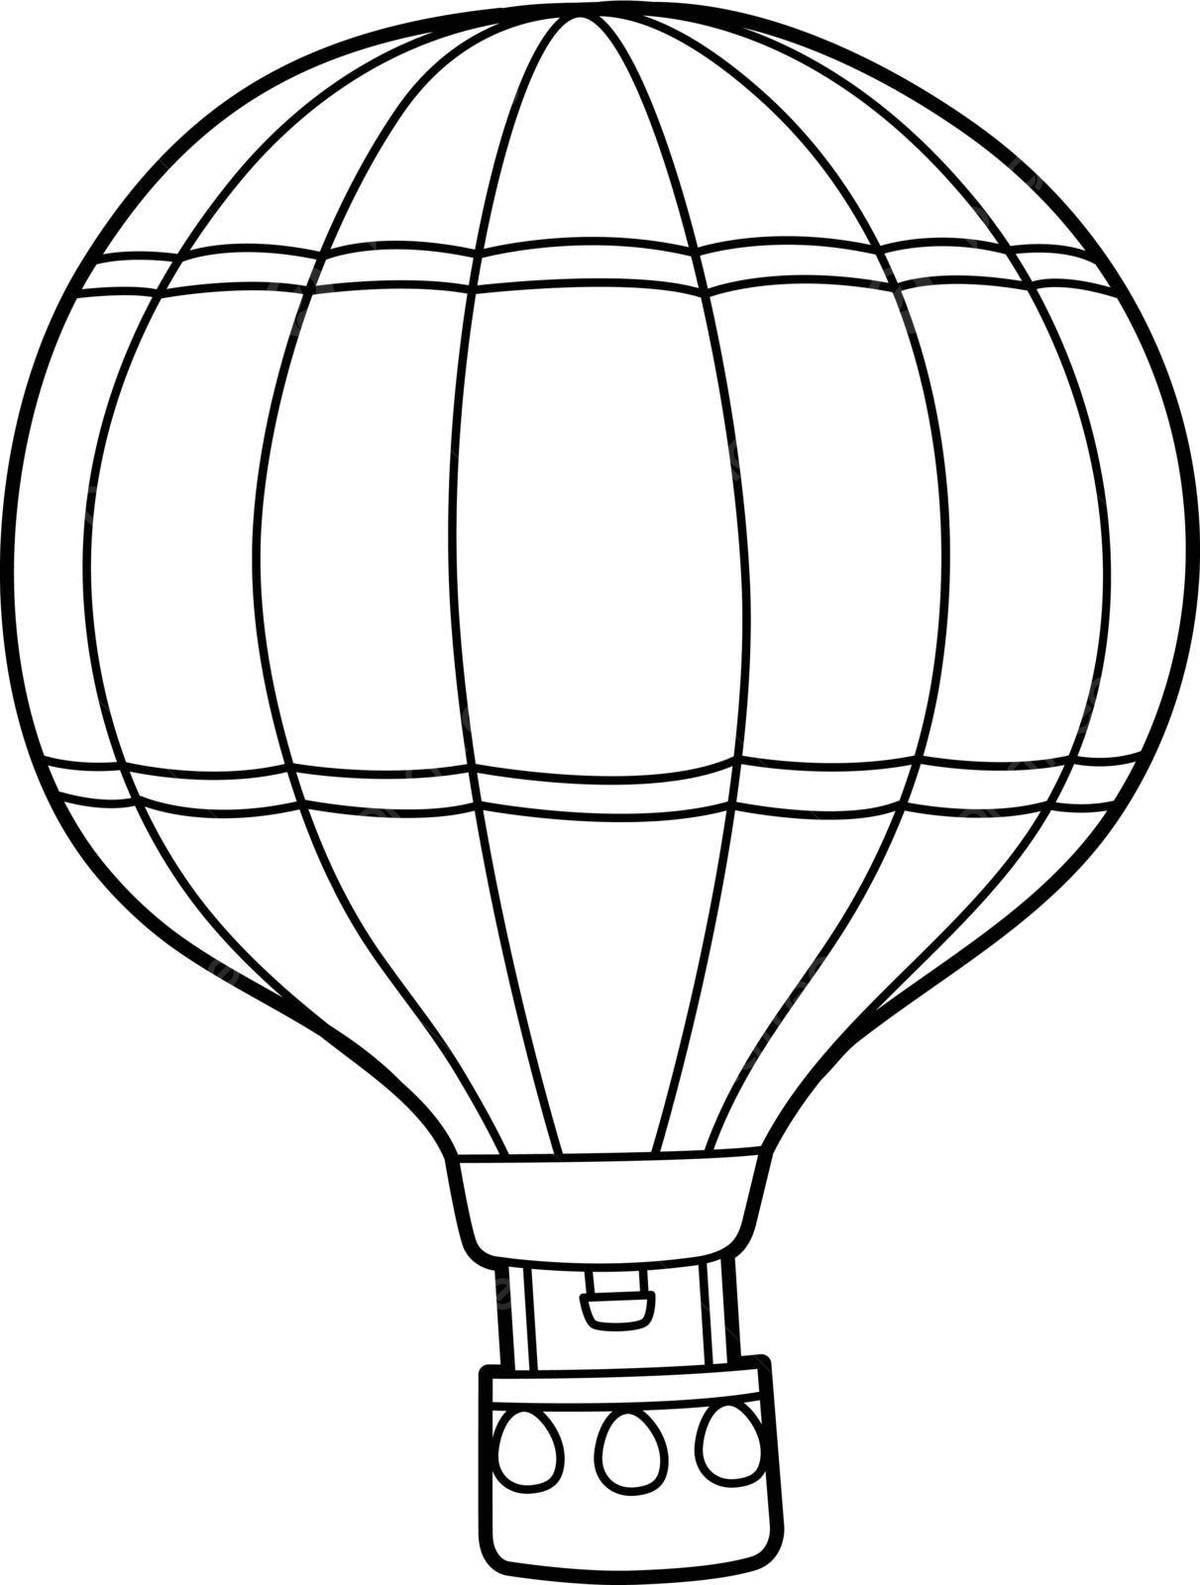 Isolated hot air balloon coloring page for children vector balloon drawing ring drawing ball drawing png and vector with transparent background for free download